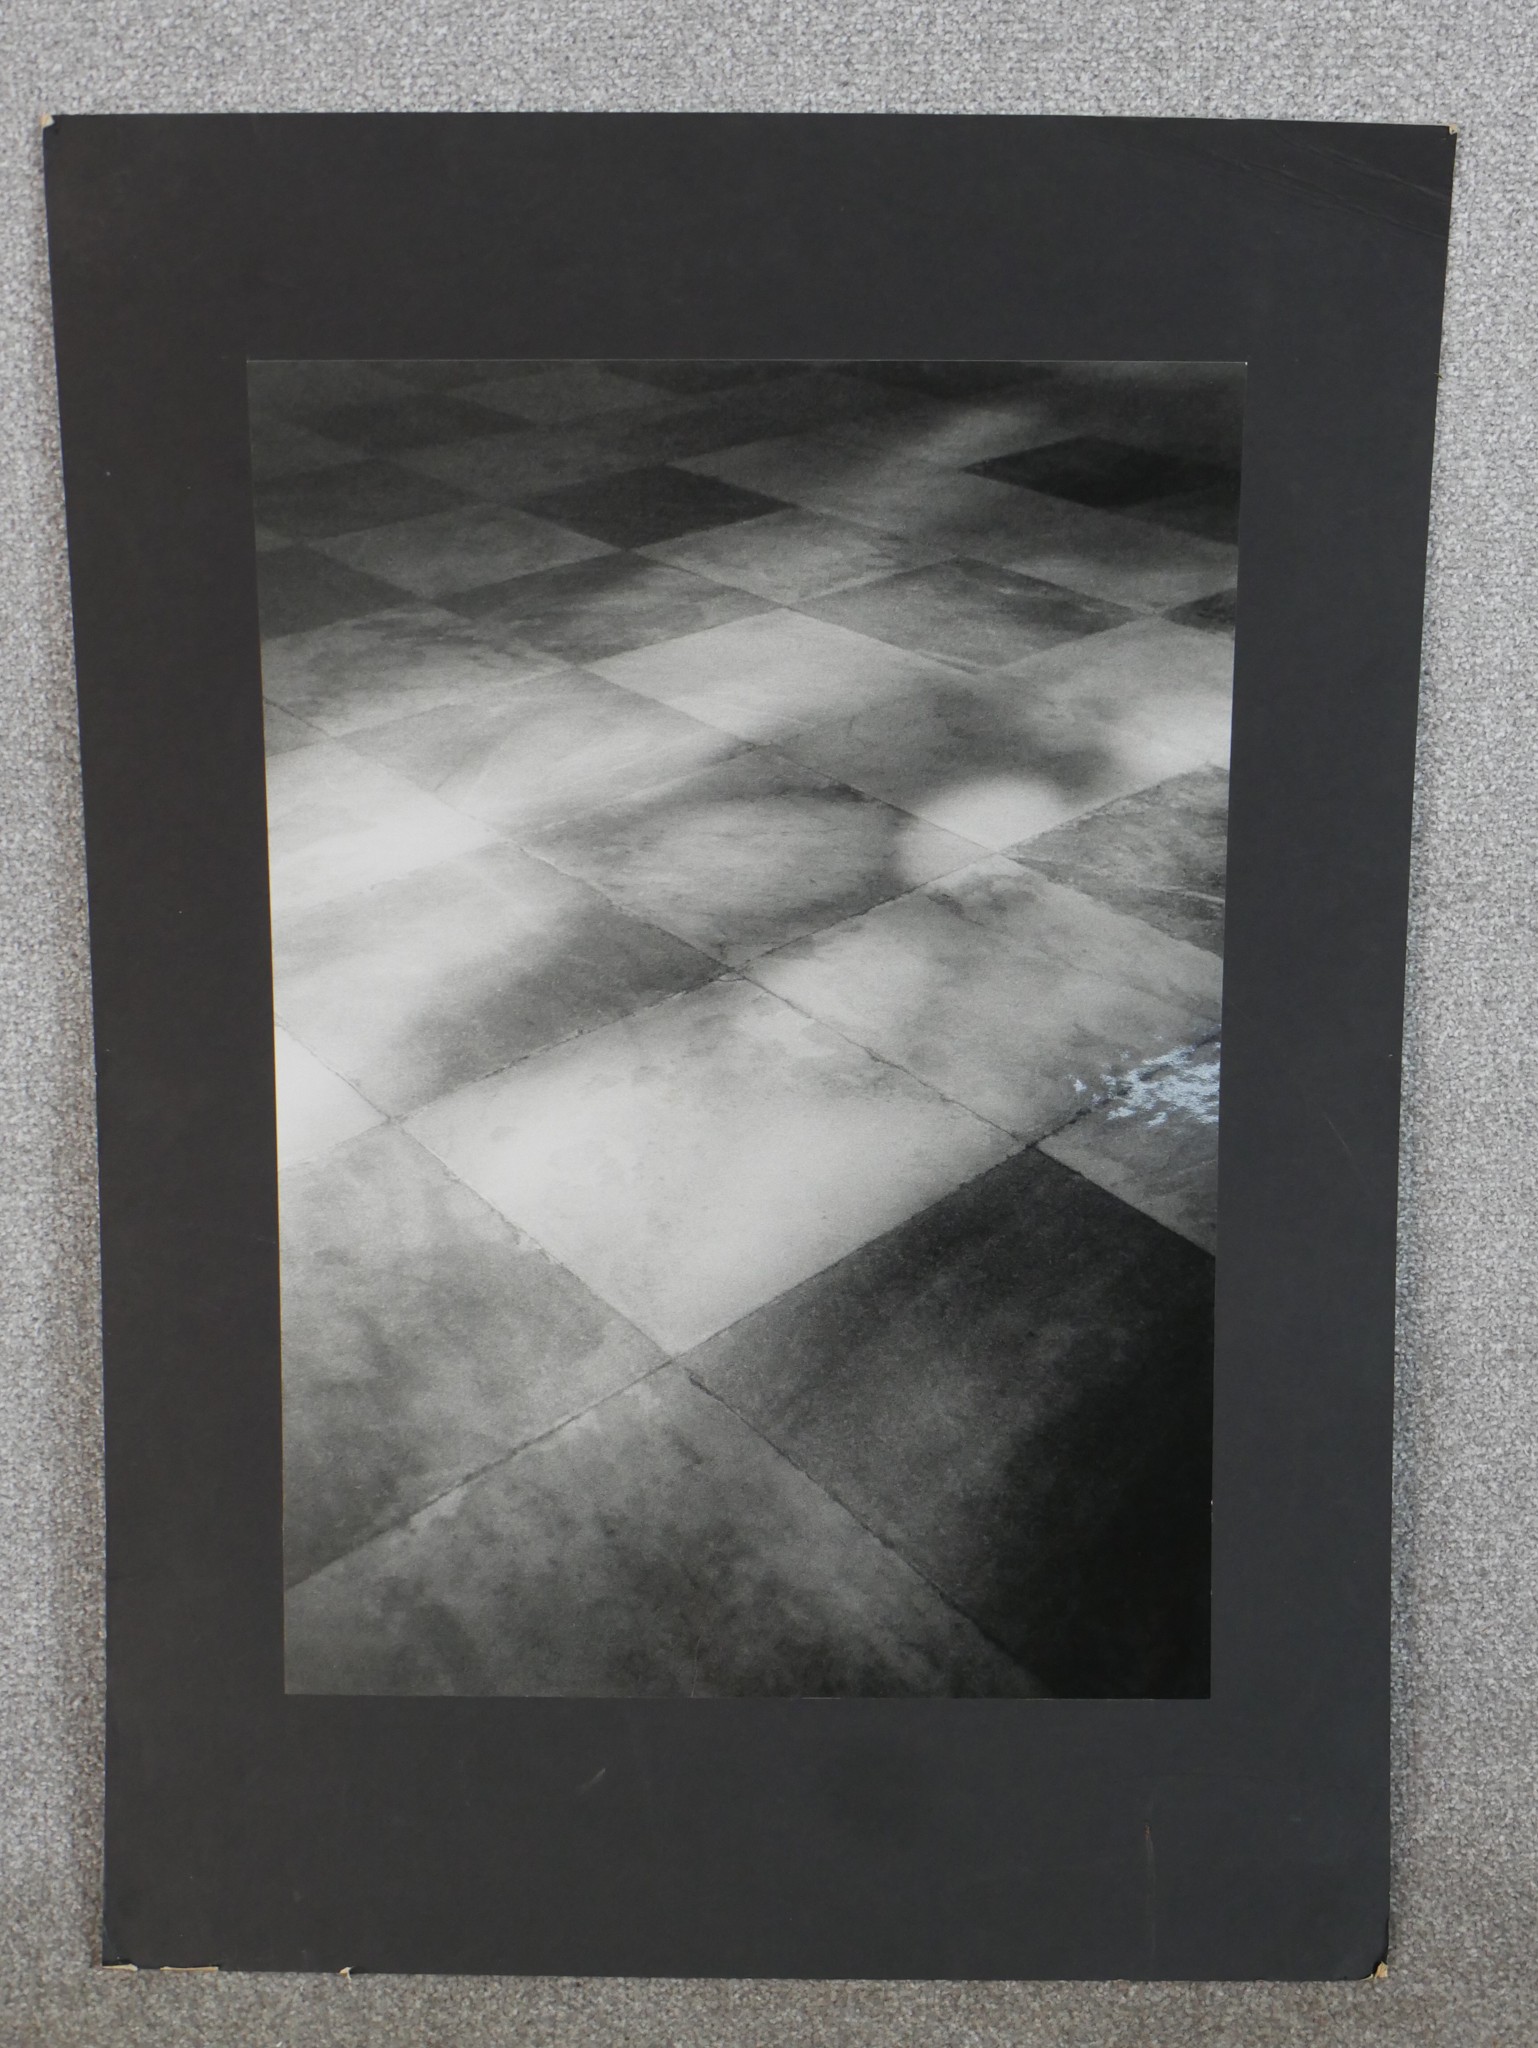 C. D. Mallon (20th century) Tiled Floor, black and white photograph, unframed, mounted, label verso.